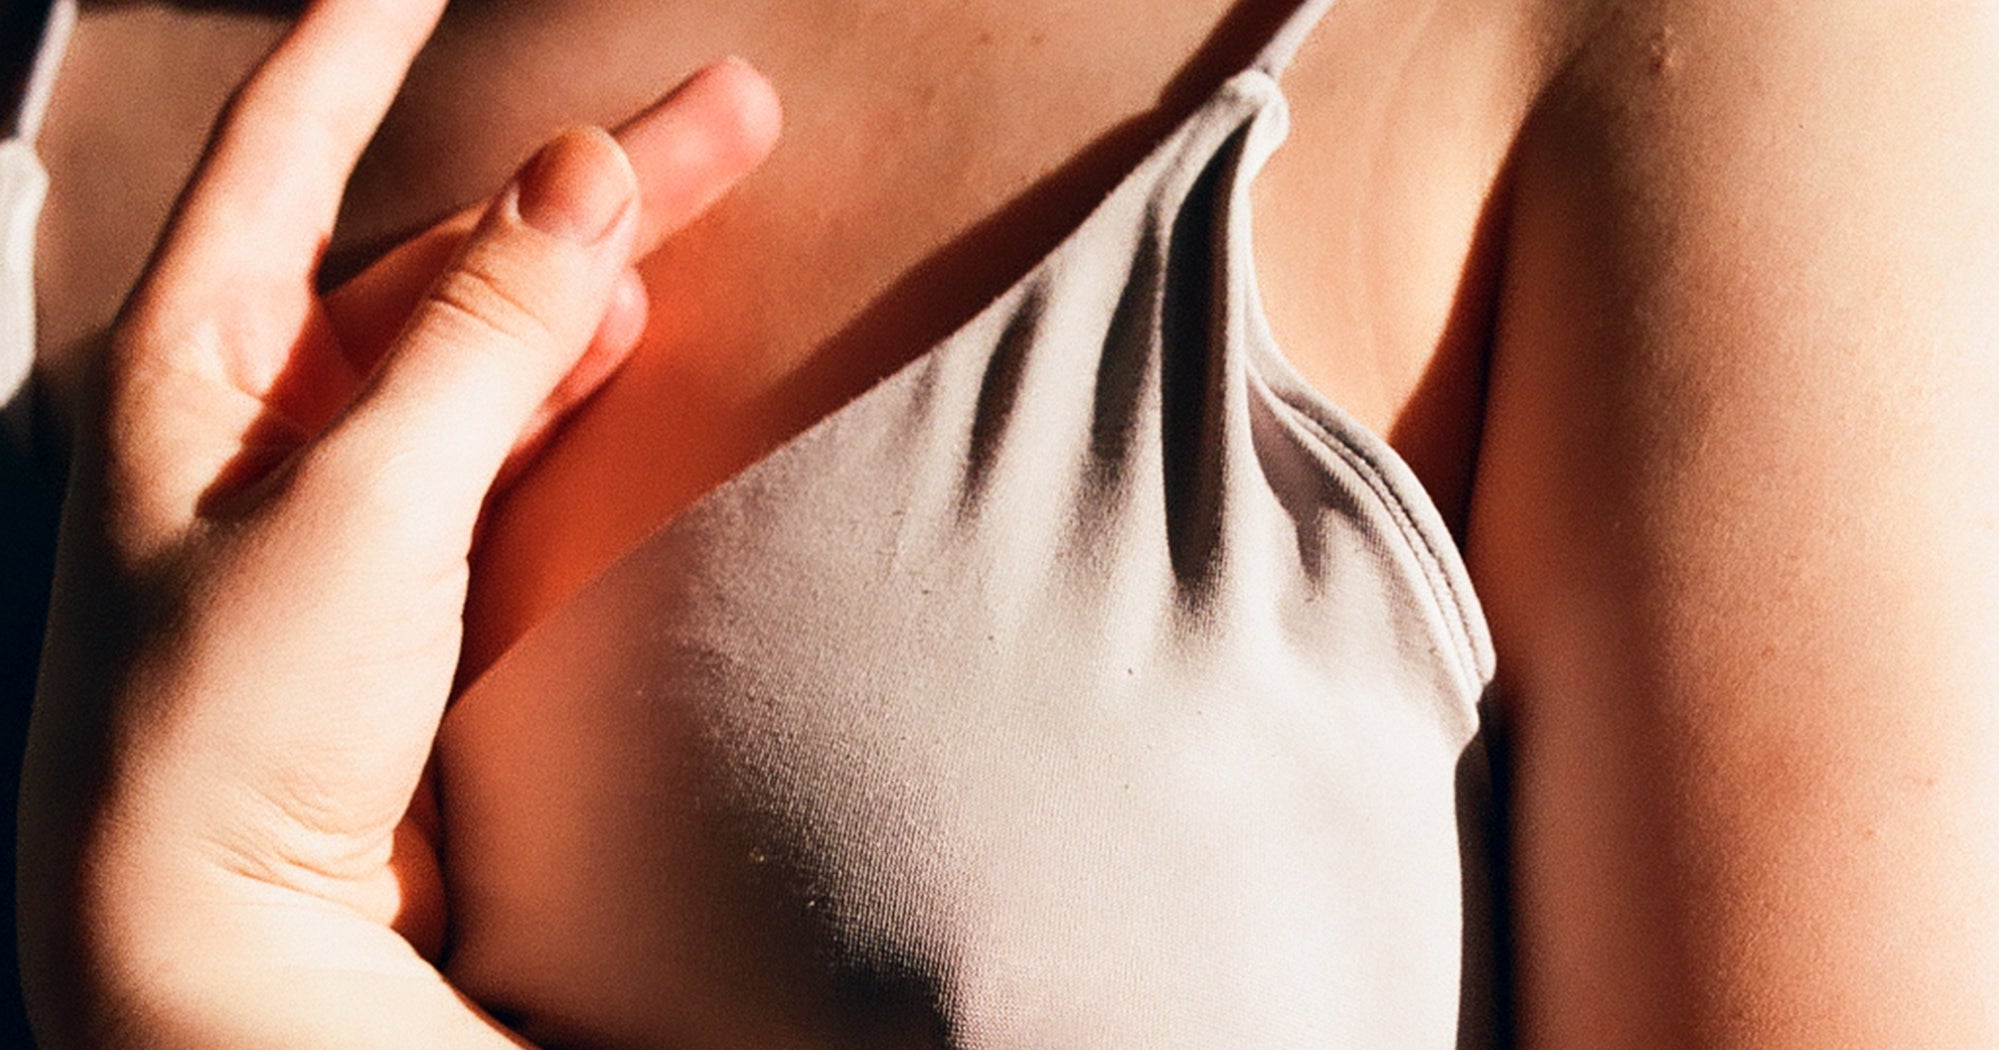 Sad Nipple Syndrome - What Is It & Do I Have It?